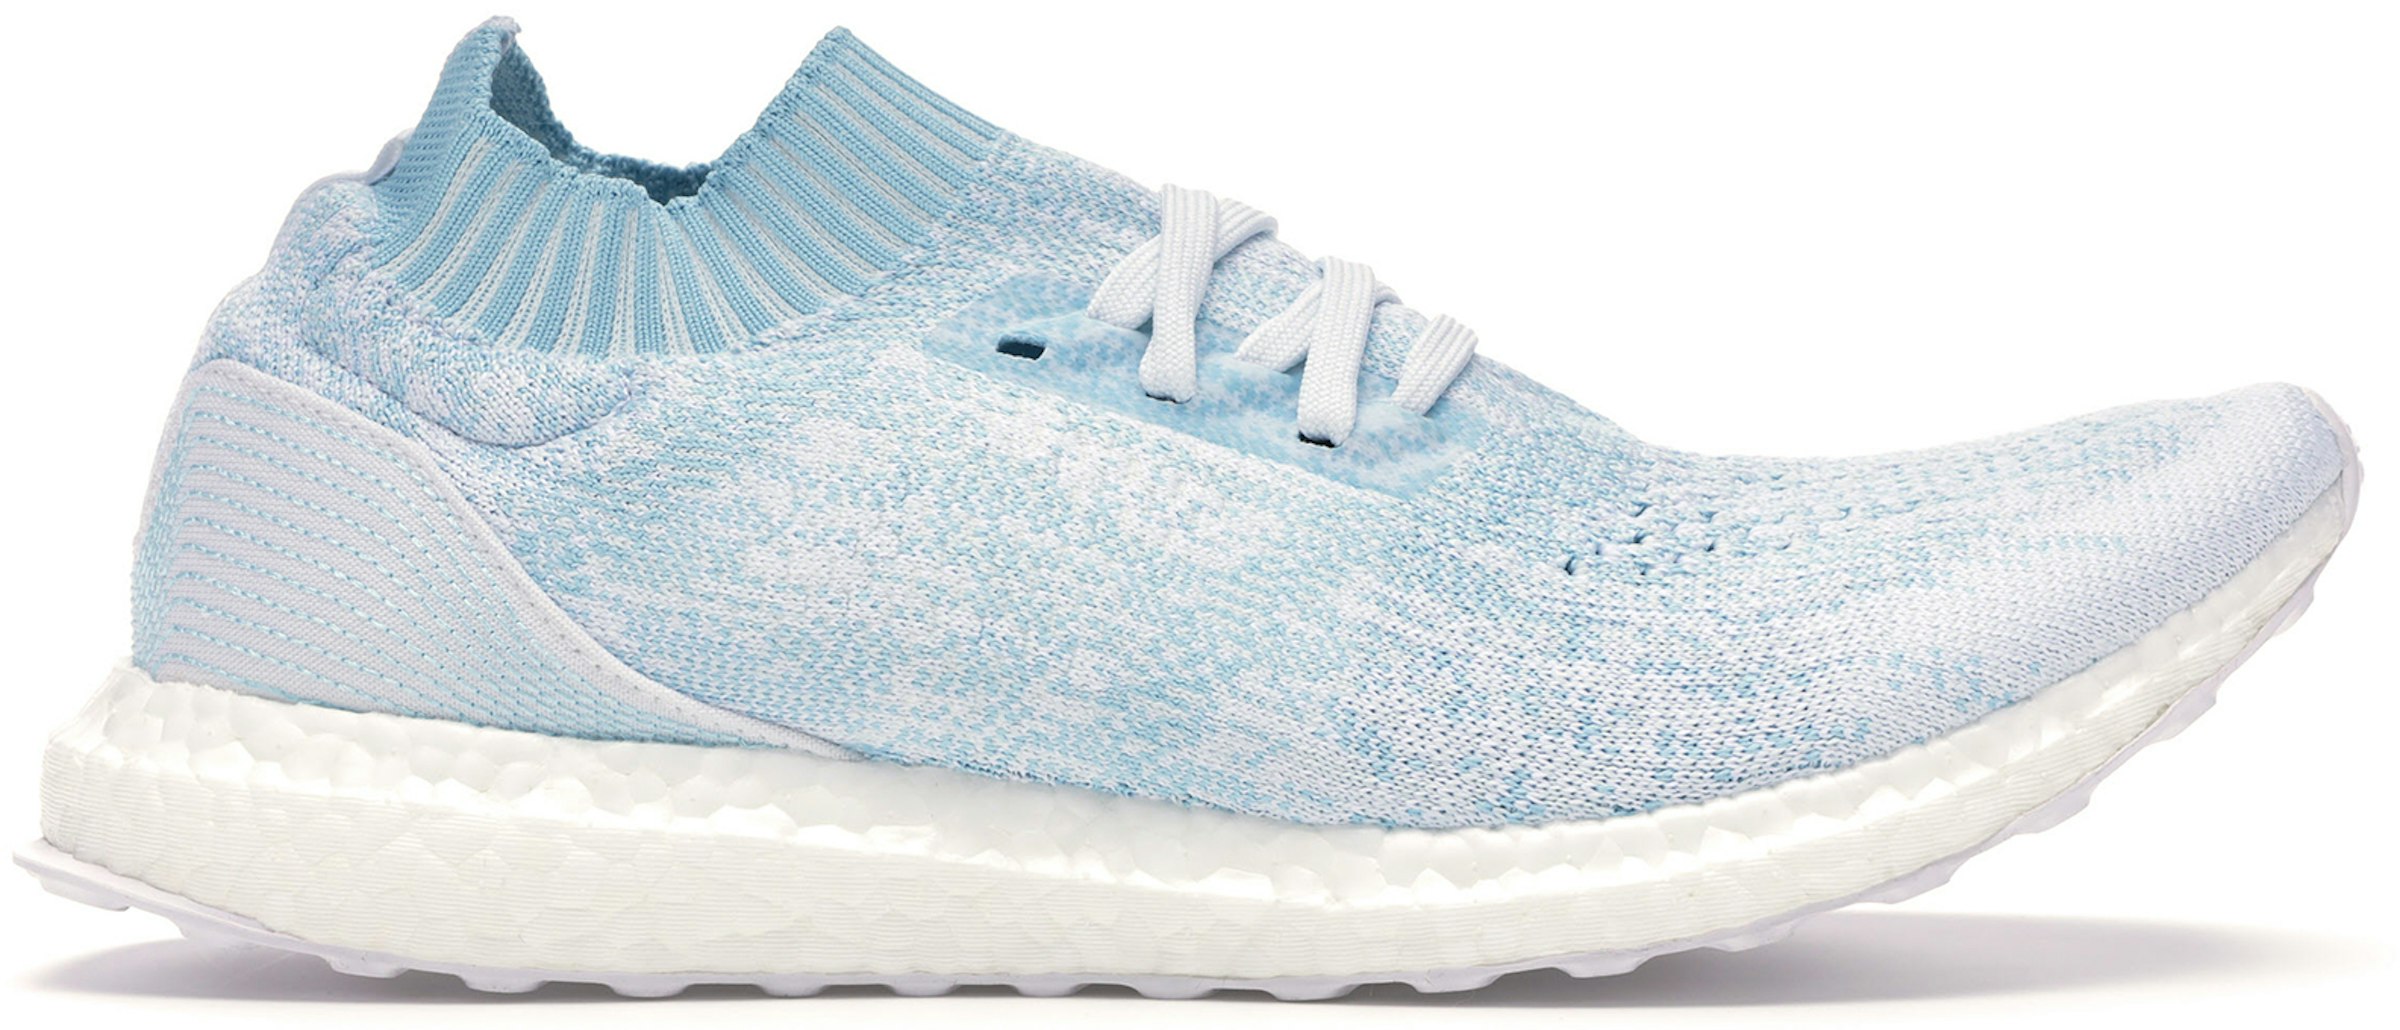 temporal empleo Fuera de adidas Ultra Boost Uncaged Parley Coral Bleaching Men's - CP9686 - US